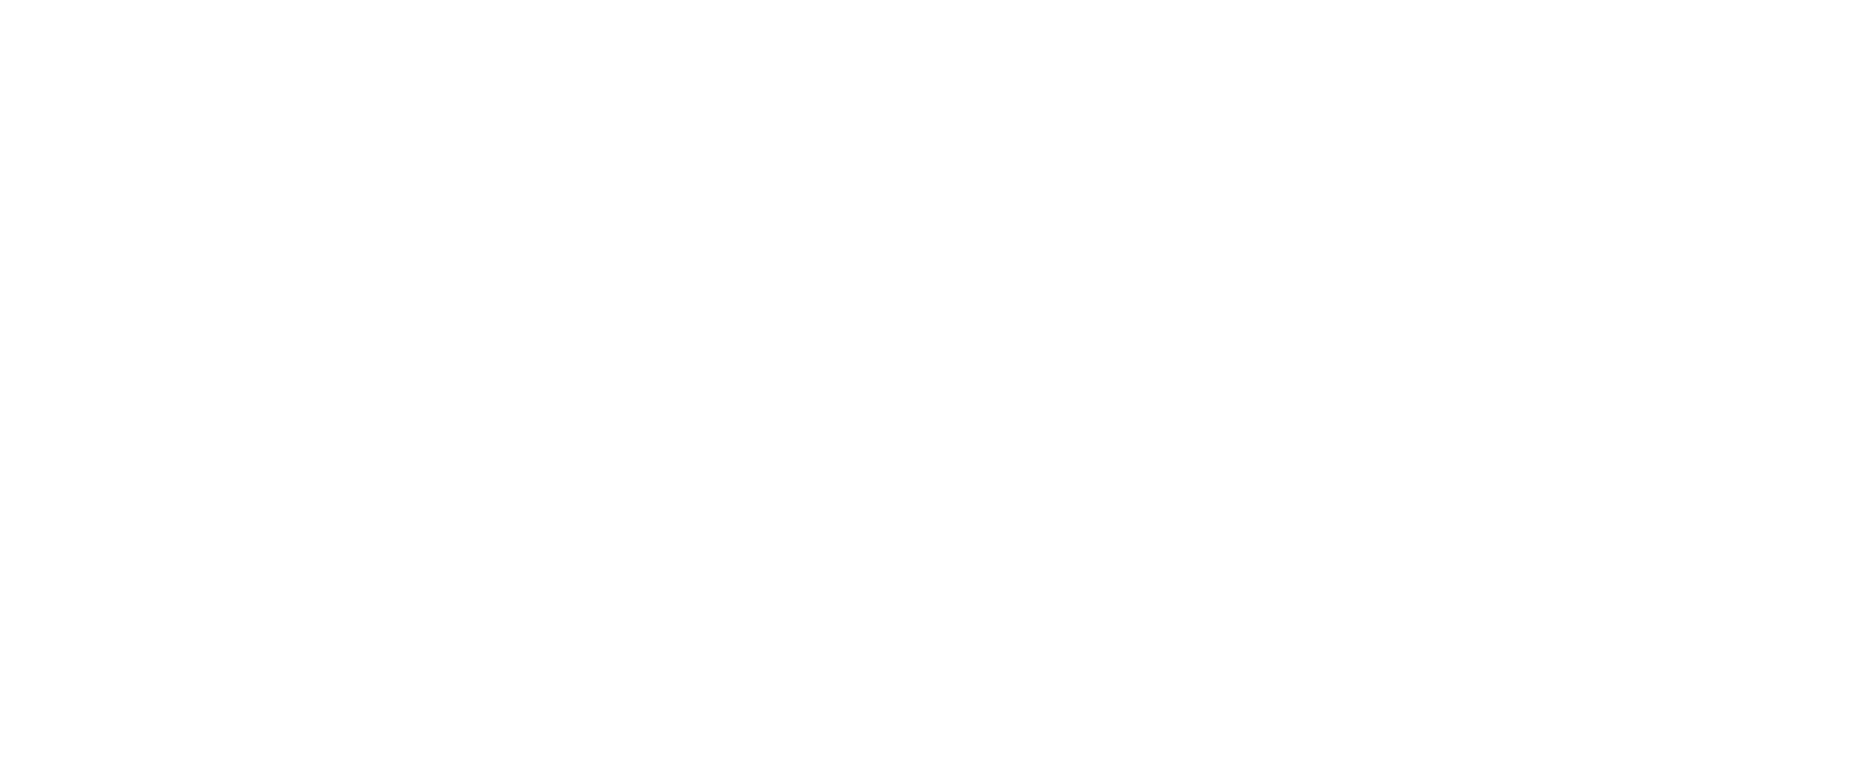 Texas Historical Commission - Real Places Telling Real Stories